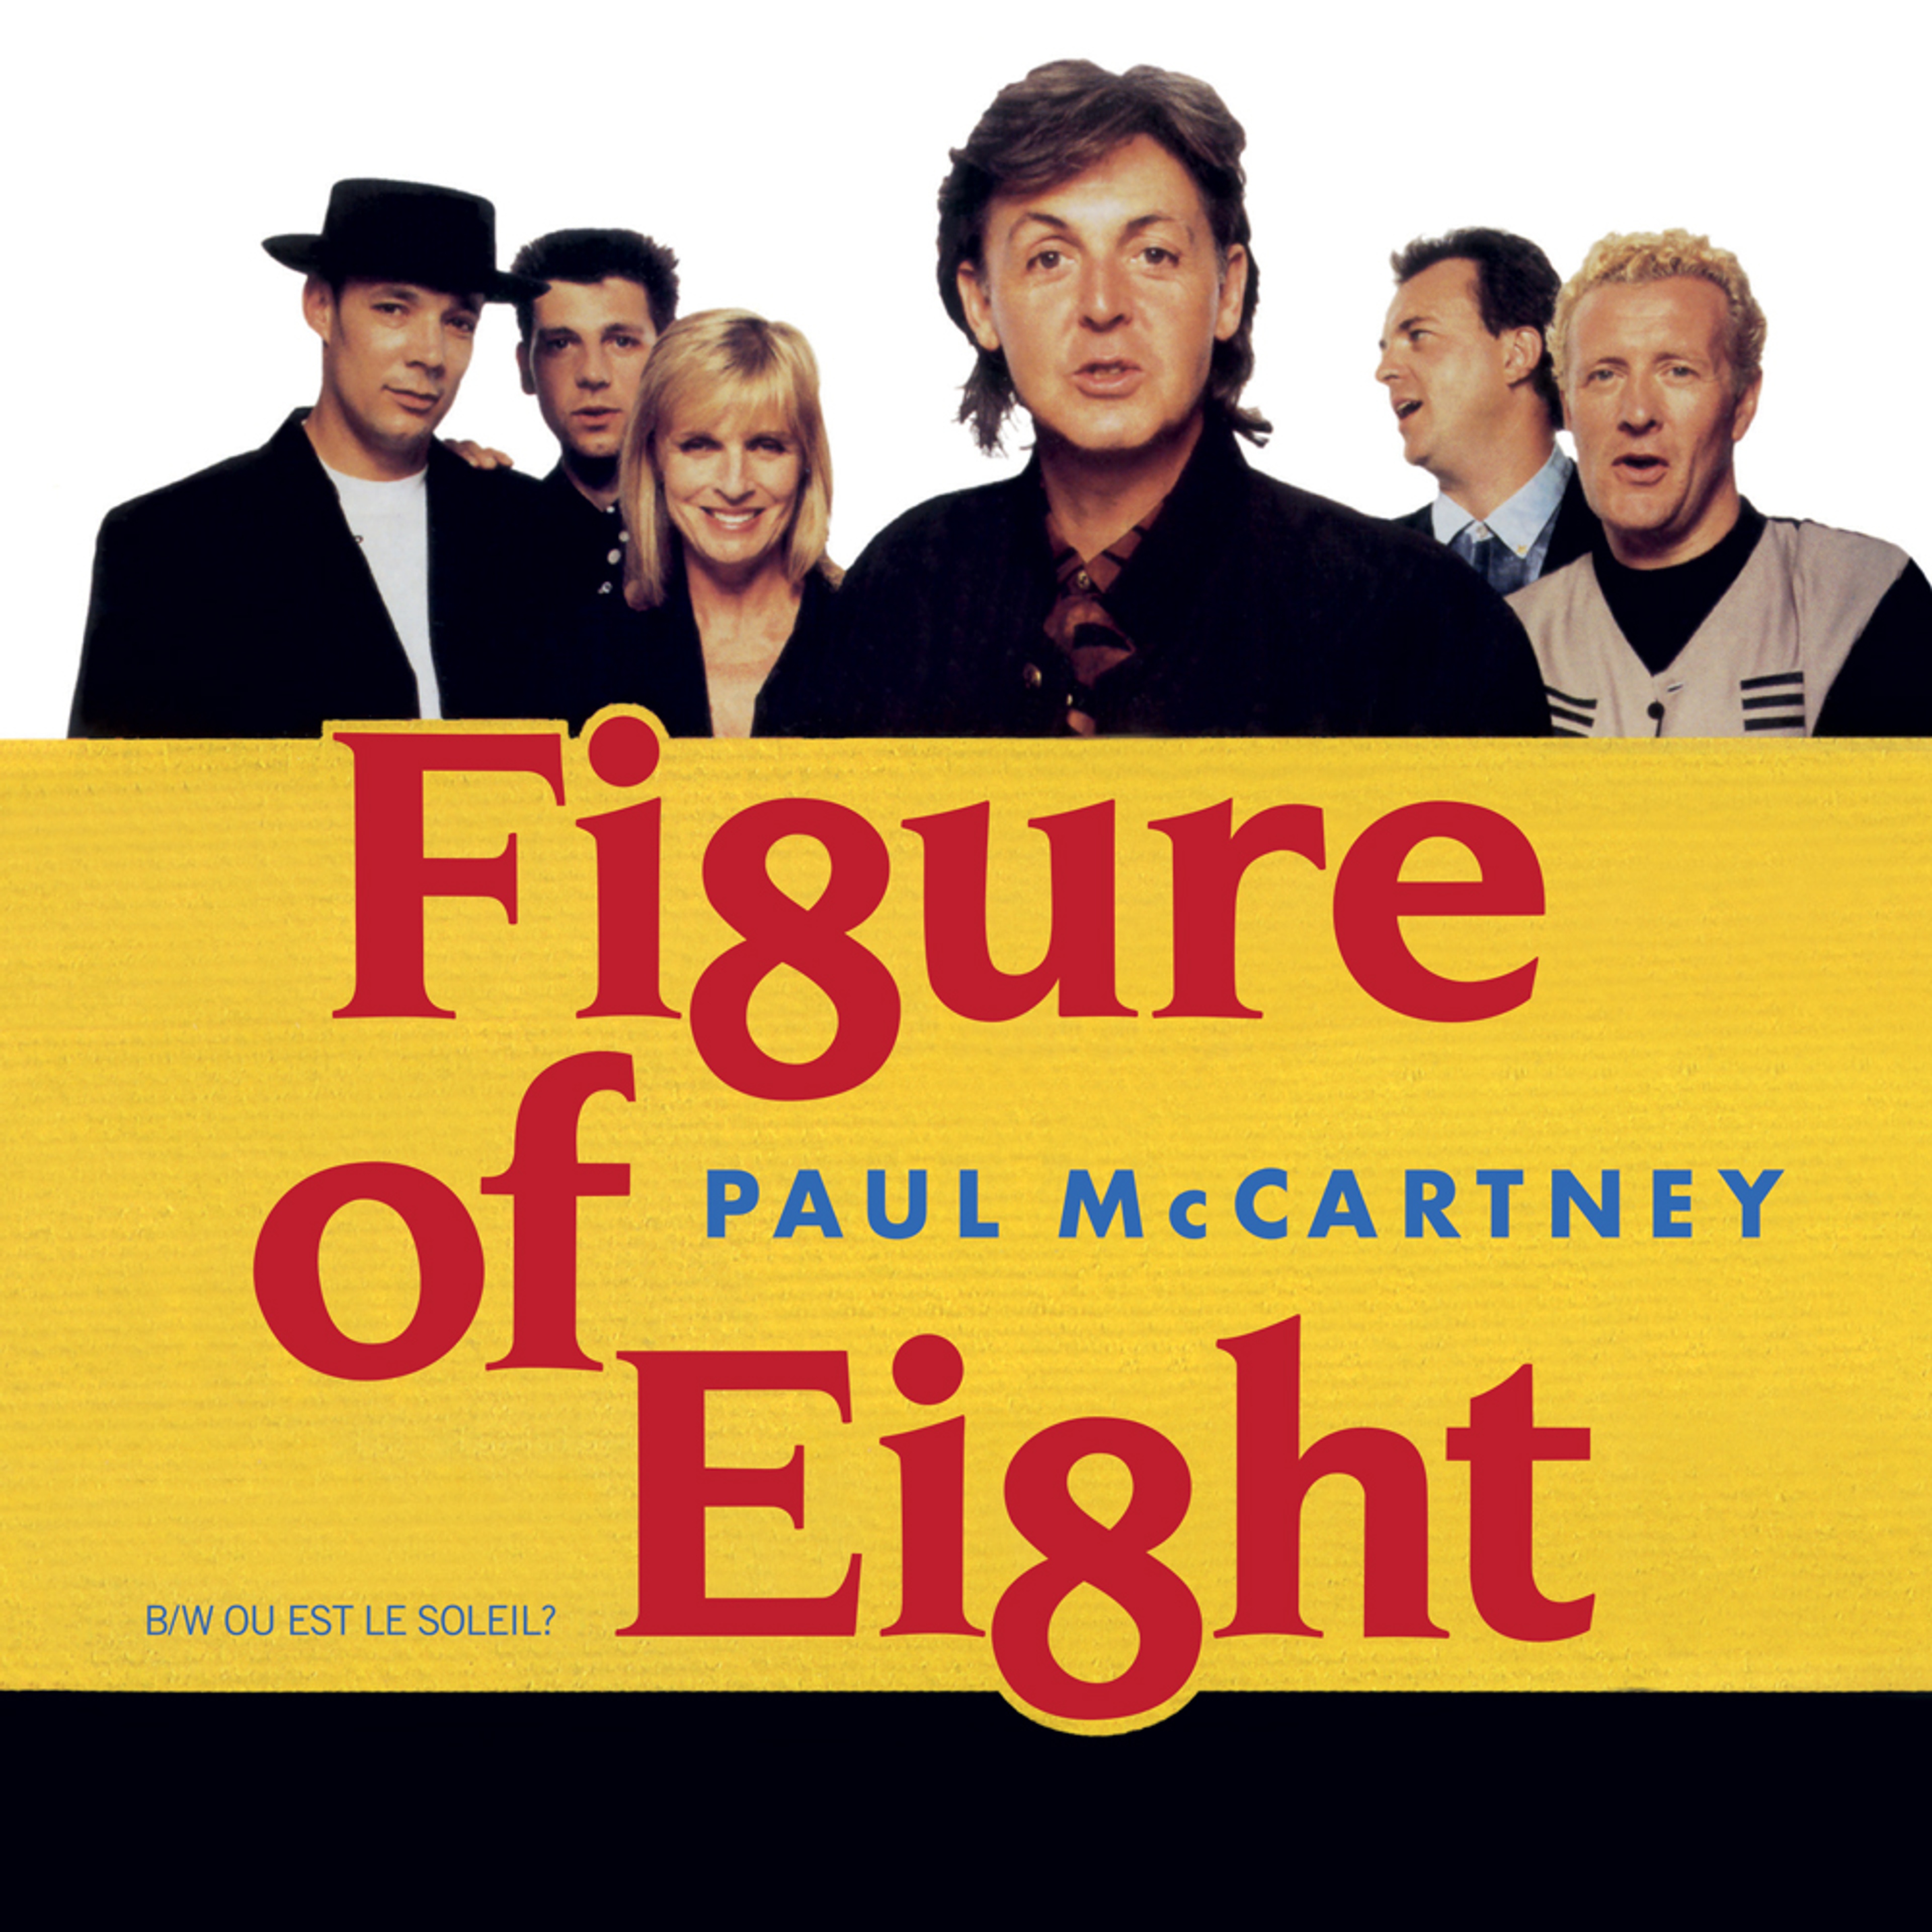 “Figure of Eight” Single artwork as featured in 'The 7" Singles Box'